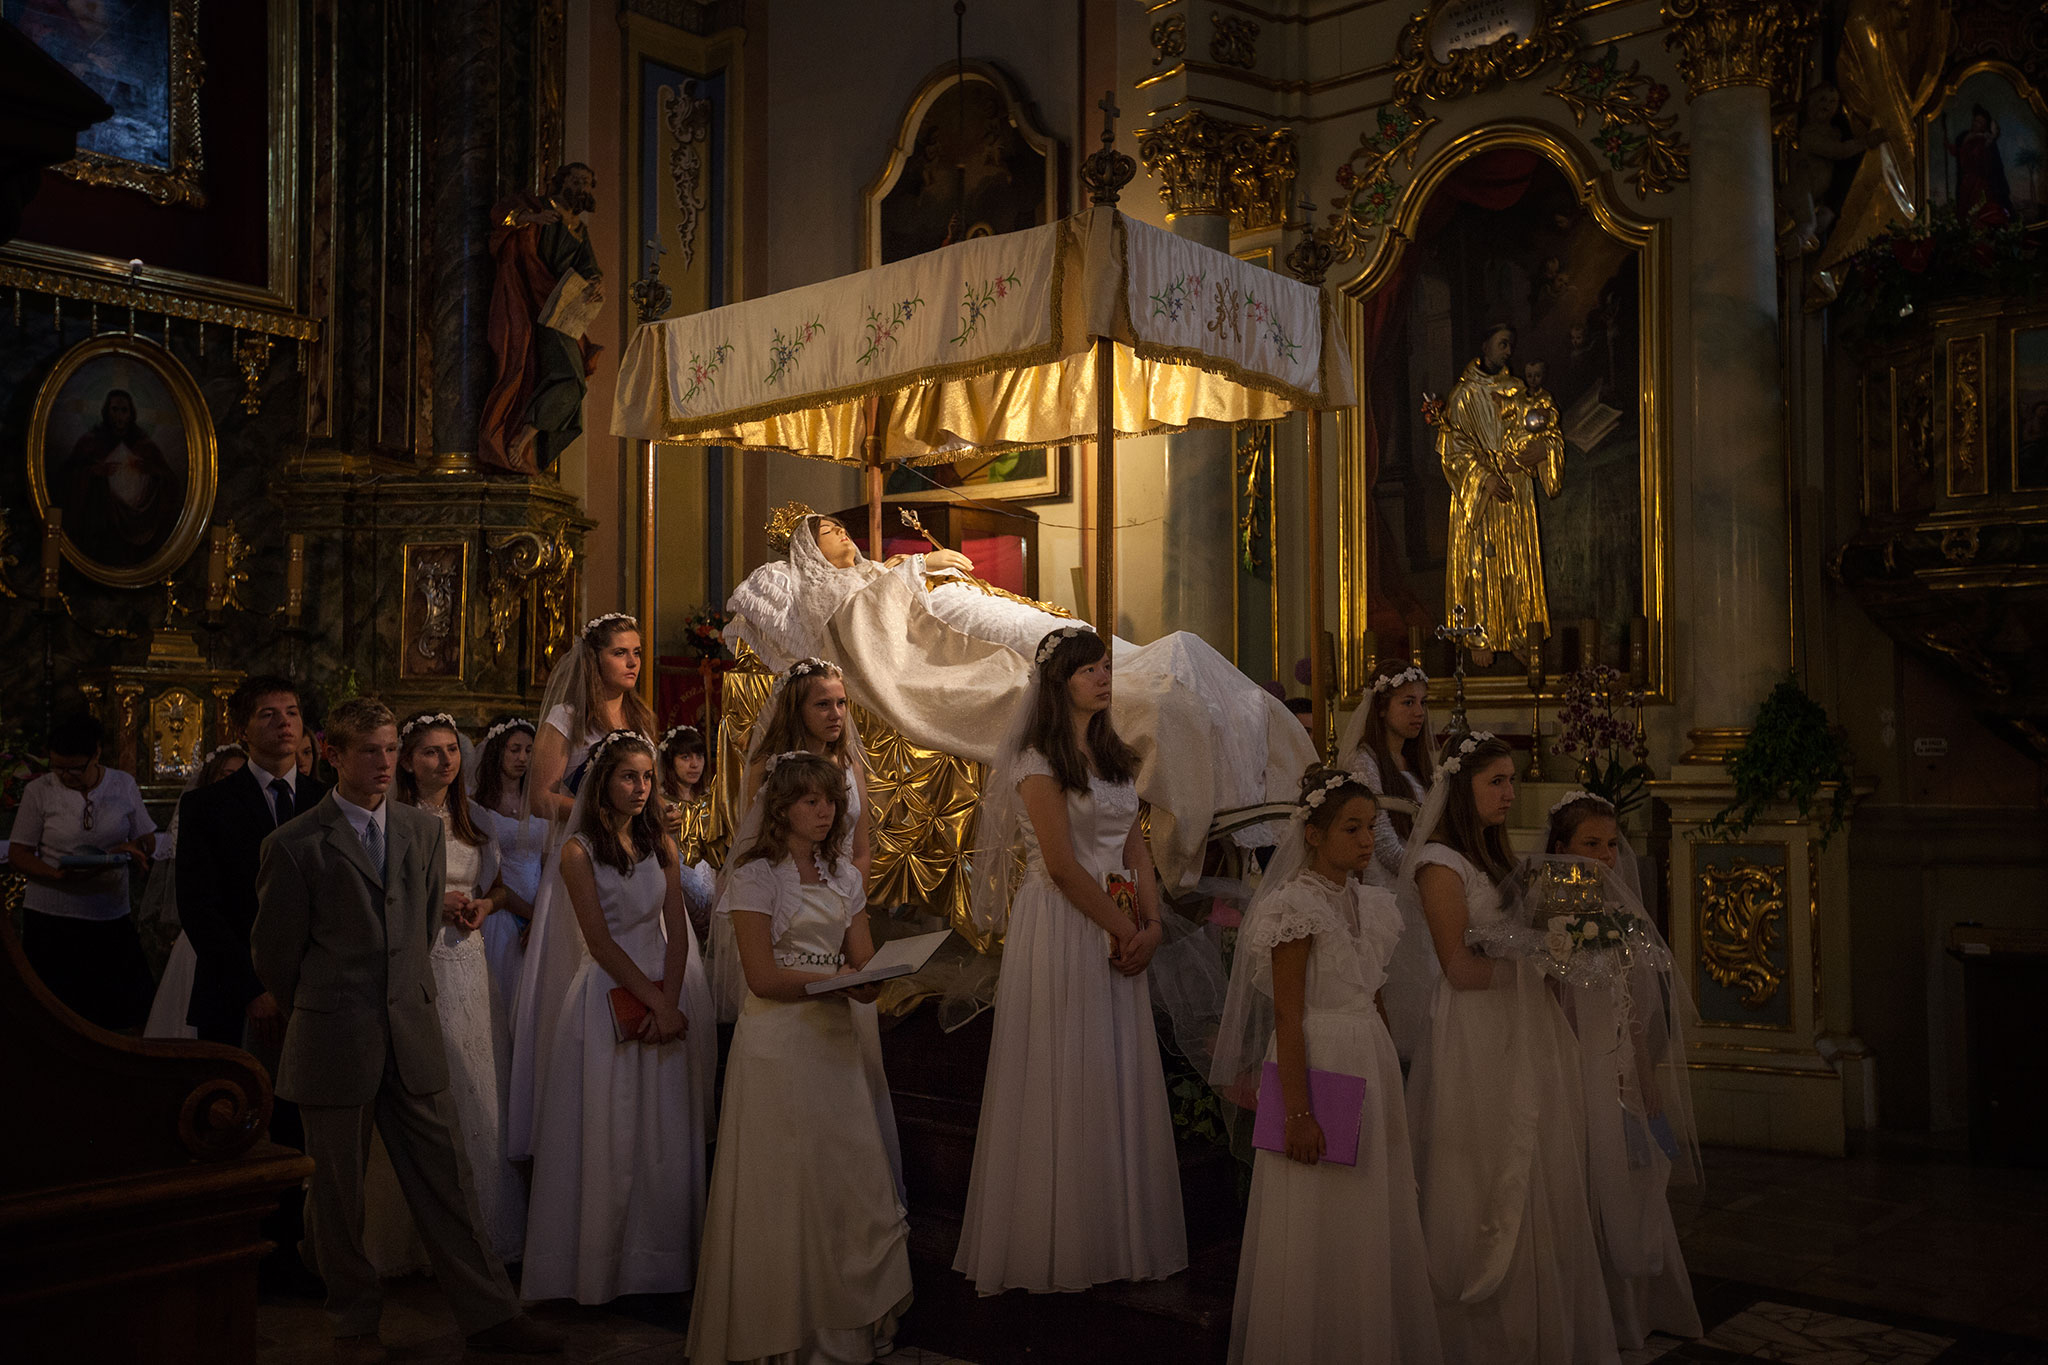 Mary is a magnet for young and old. On August 12, during a Mass celebrating her assumption into heaven, Roman Catholic youths guard a life-size figure in Kalwaria Pacławska, Poland. The Feast of the Assumption is a weeklong festival here.